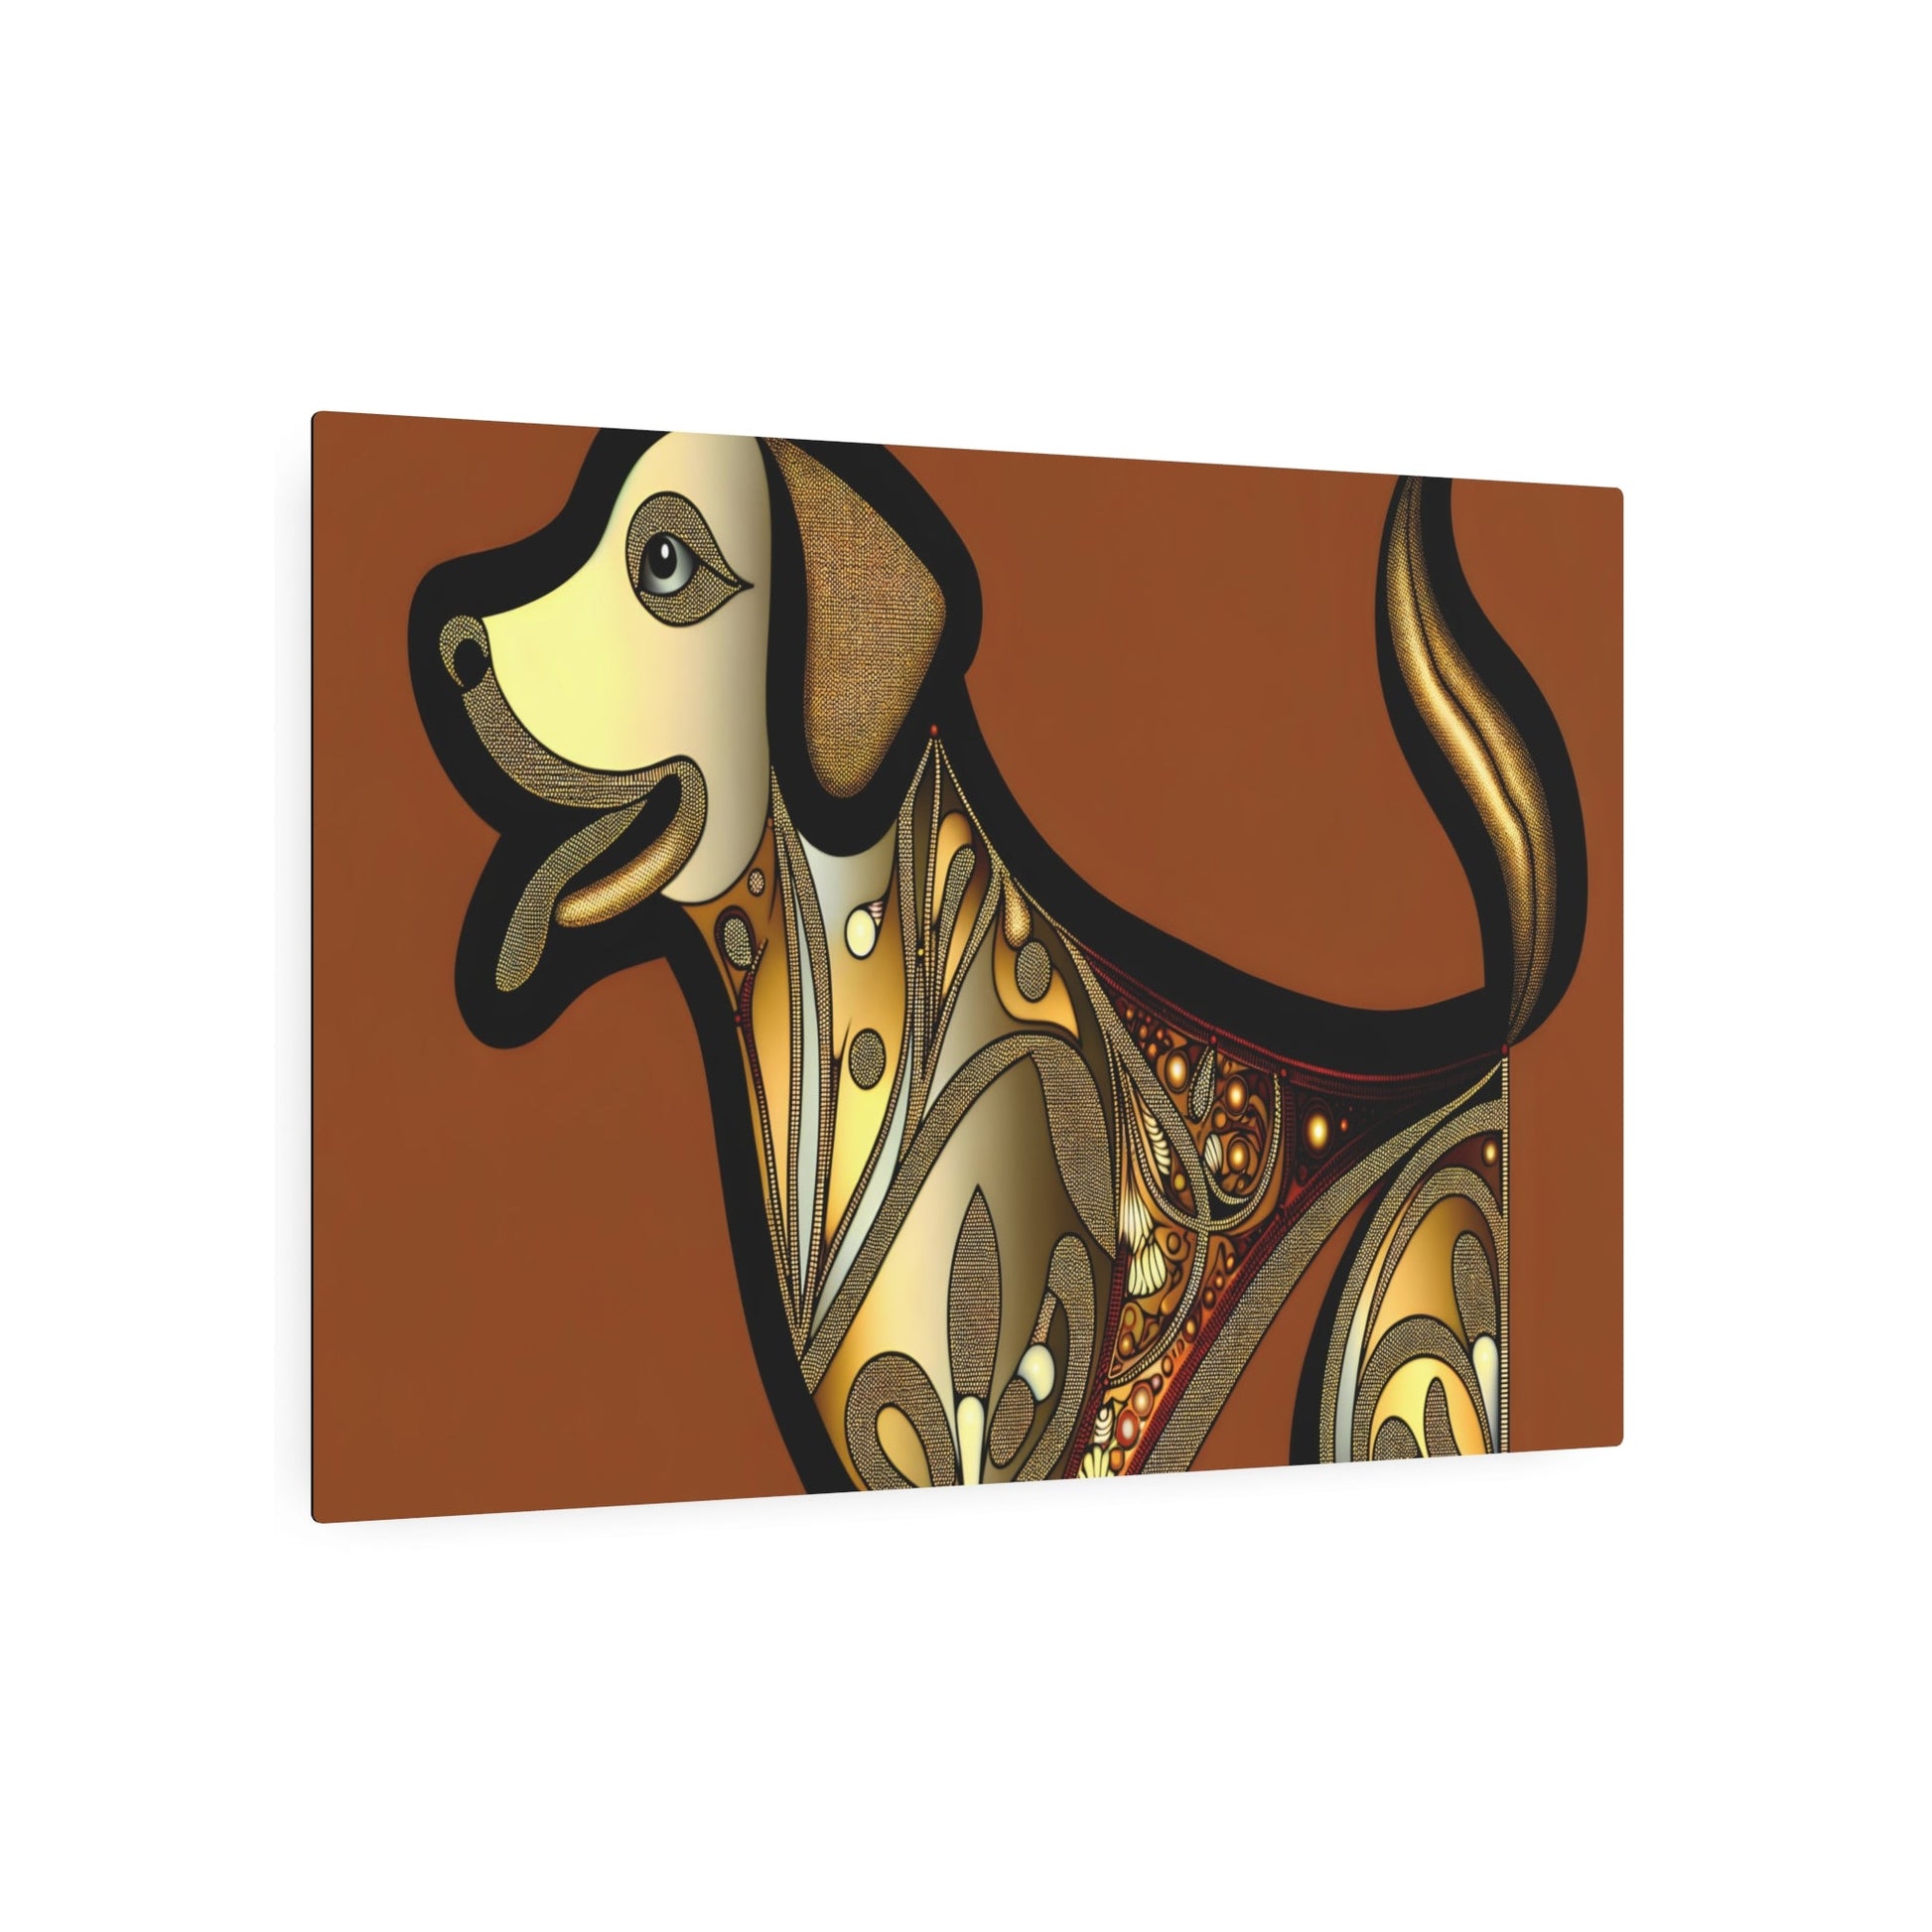 Metal Poster Art | "Byzantine Art Style Dog Illustration with Gold Detailing and Mosaic Structures - Non-Western & Global Styles Collection" - Metal Poster Art 36″ x 24″ (Horizontal) 0.12''